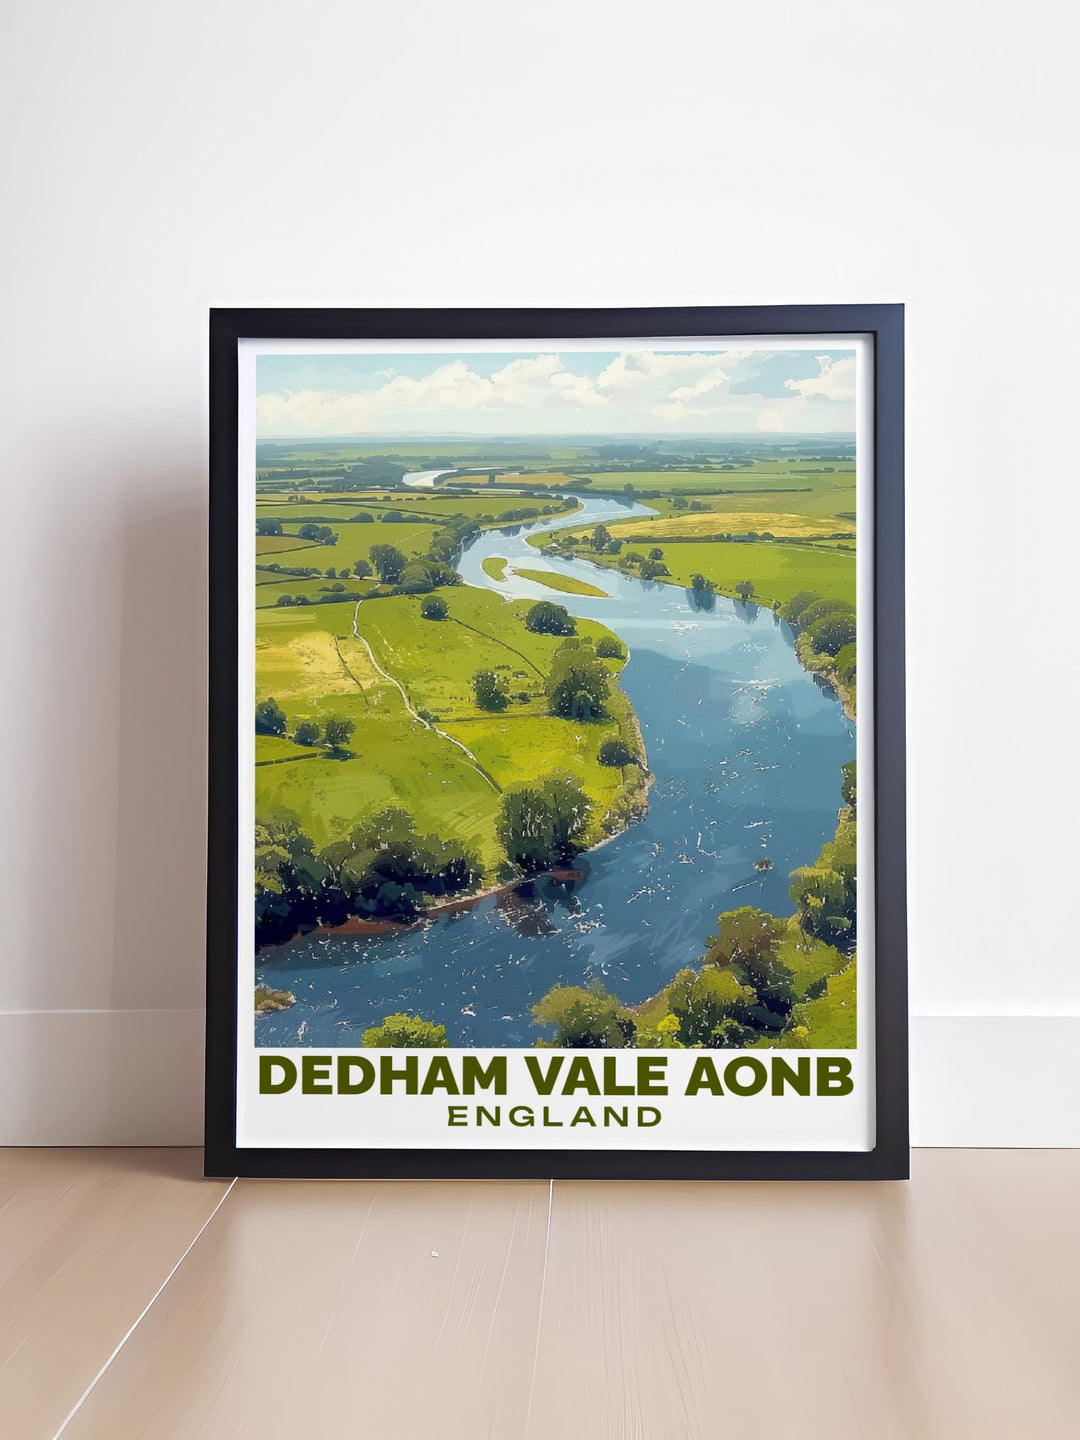 Vintage poster highlighting the artistic heritage of Dedham, featuring the landscapes that inspired John Constables most famous works.